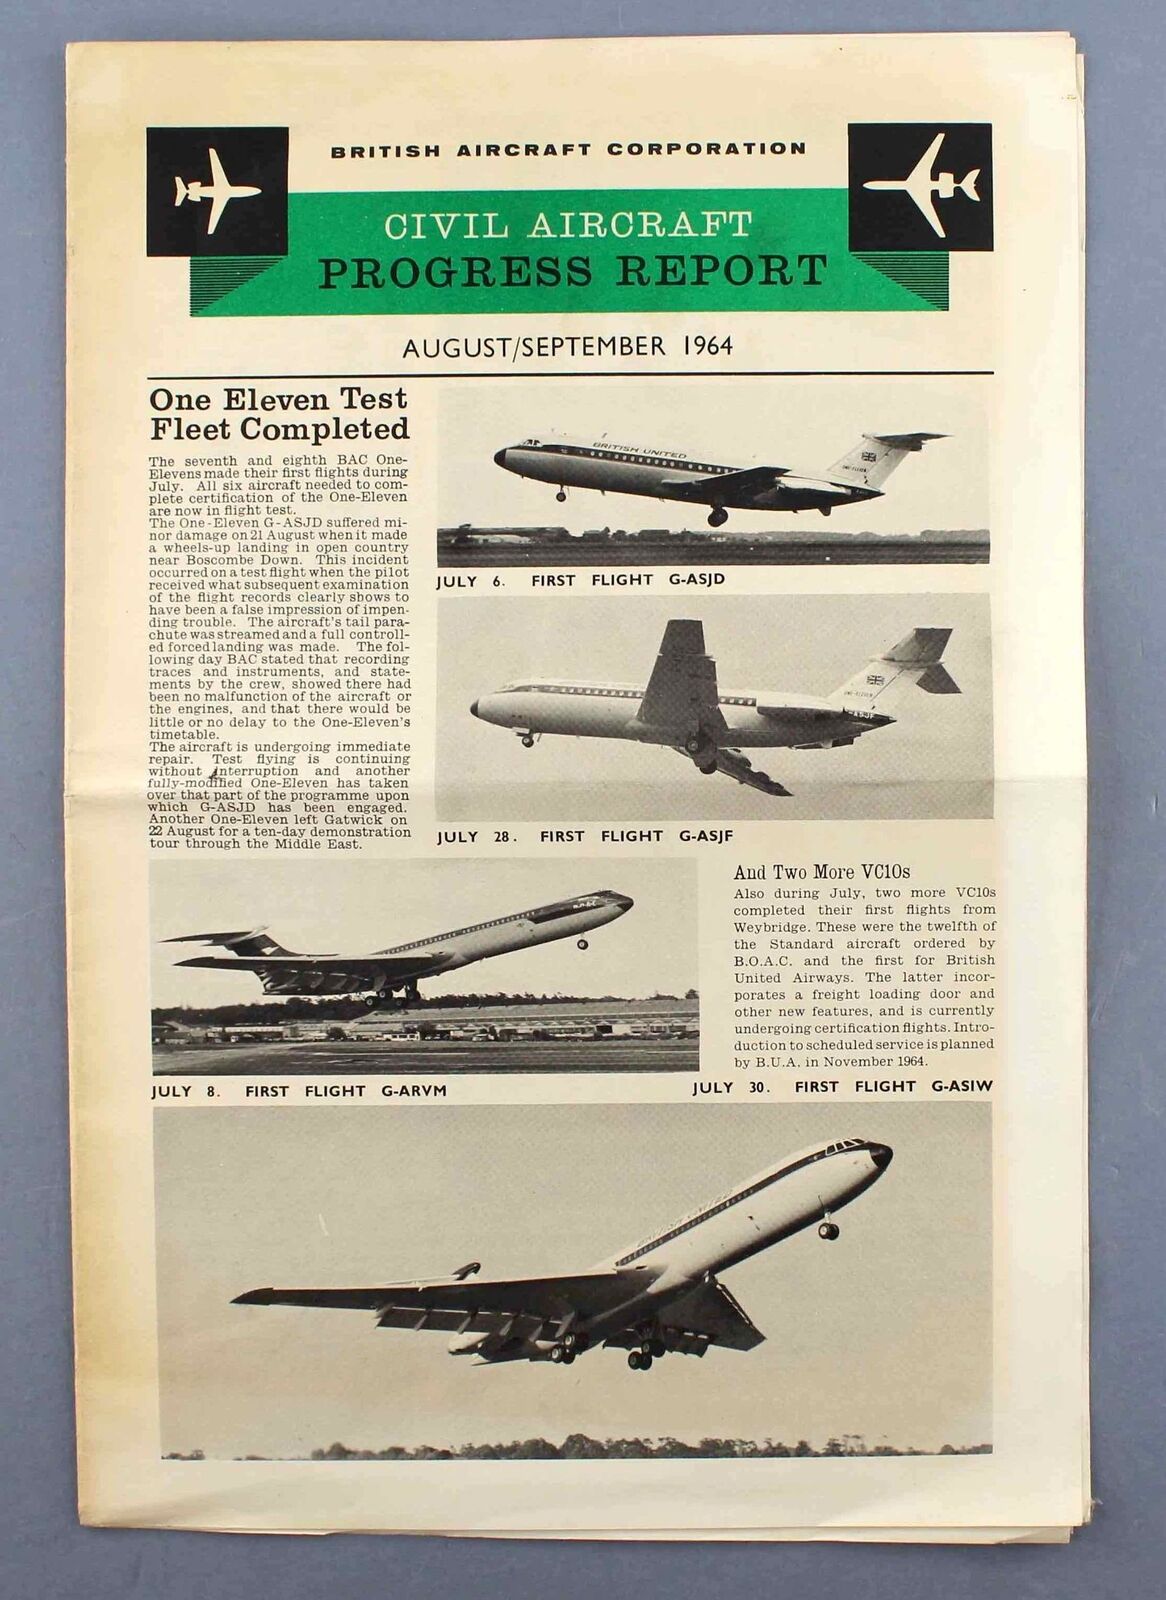 BAC CIVIL AIRCRAFT PROGRESS REPORT AUGUST/SEPTEMBER 1964 - ONE ELEVEN - VICKERS